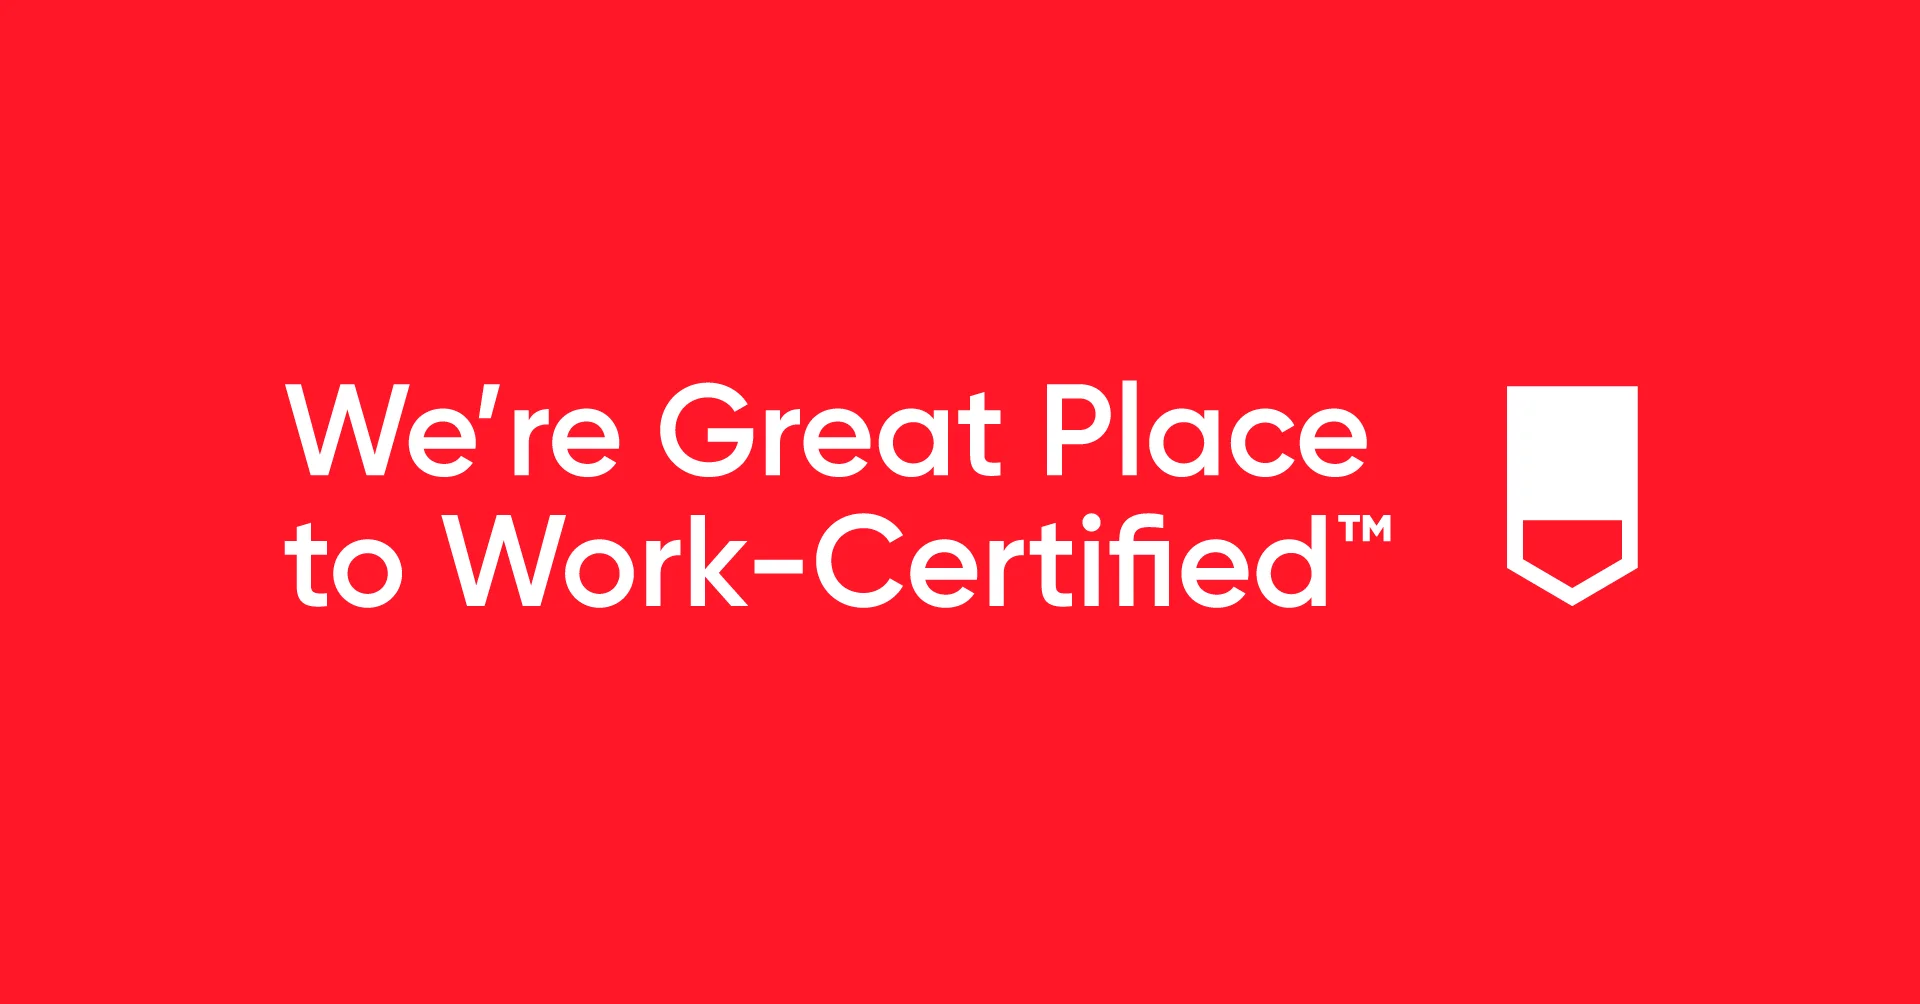 What does being a Great Place to Work Certified Organisation mean?